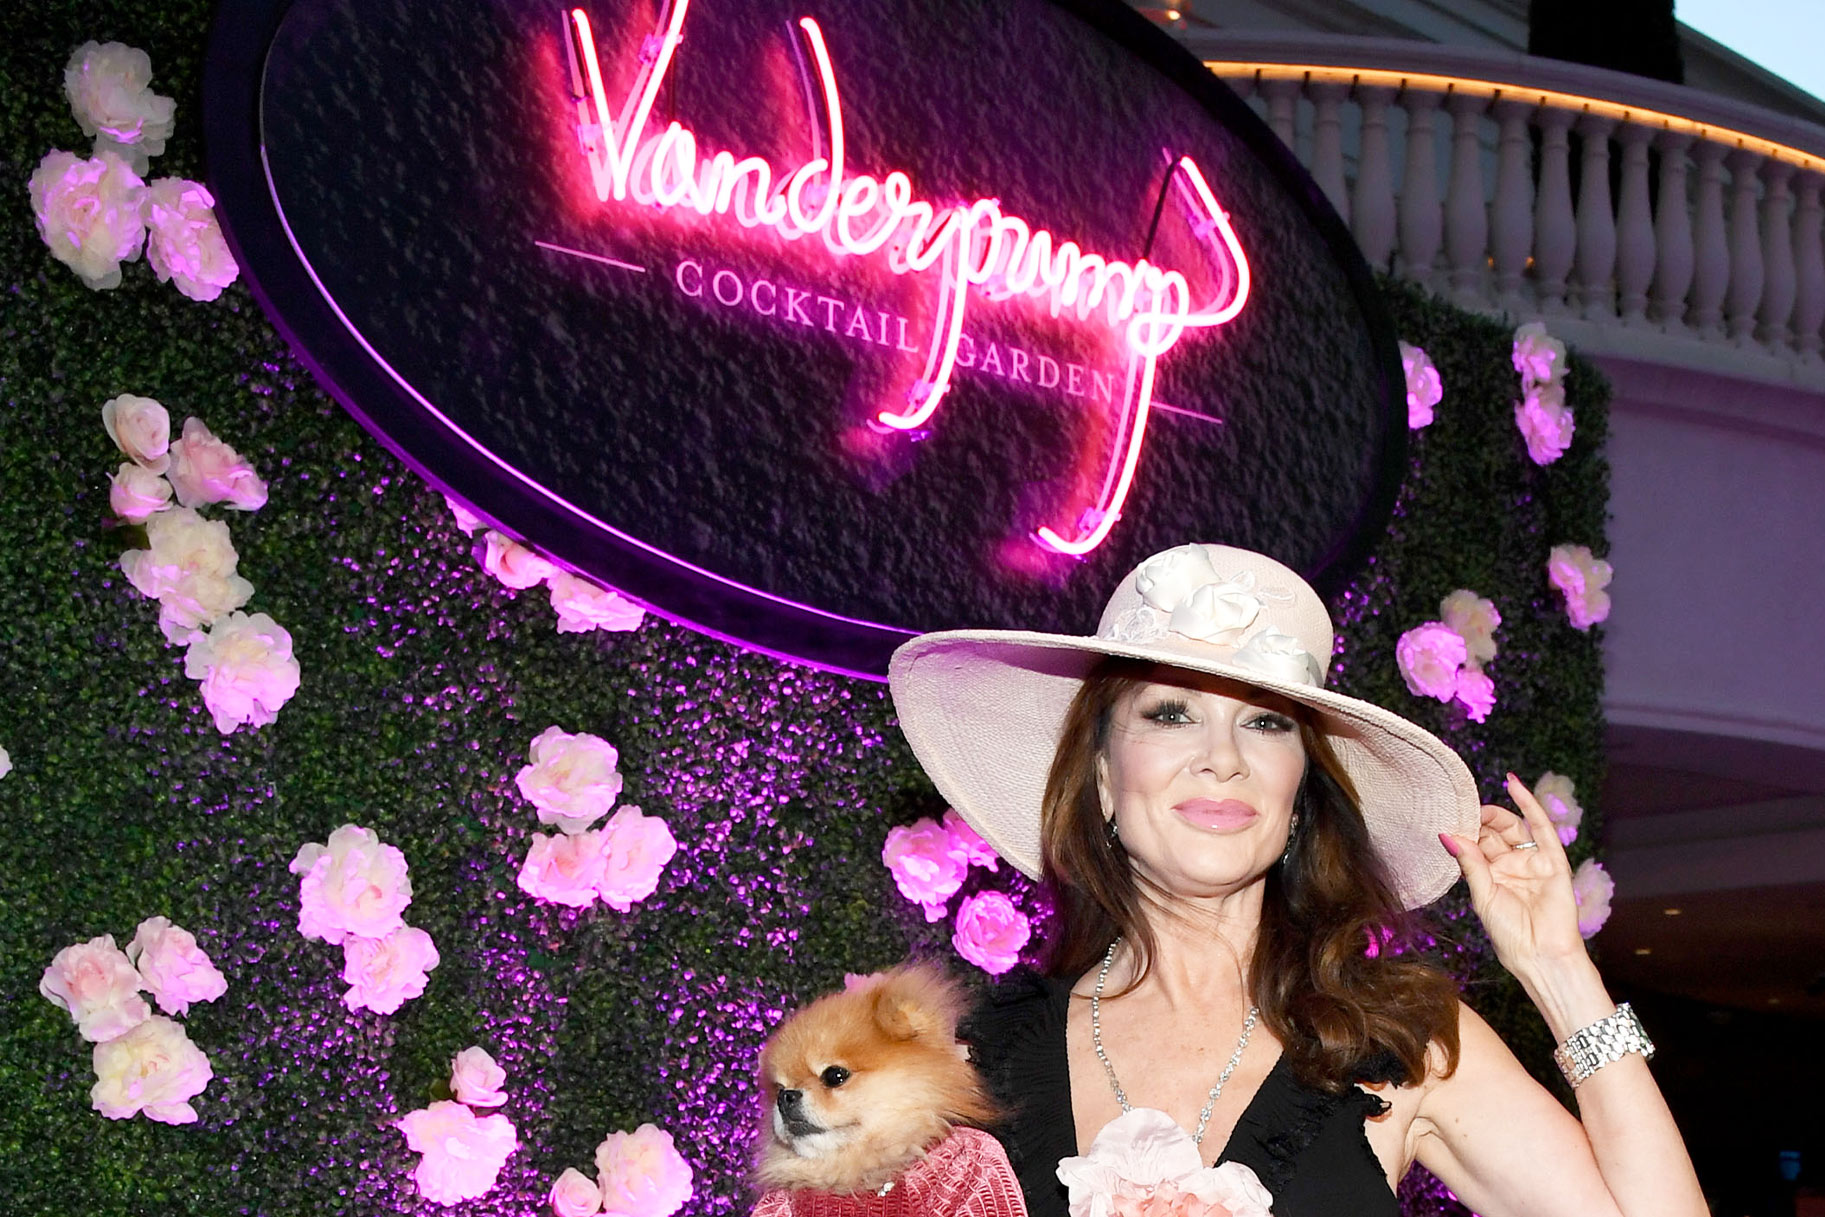 Vanderpump à Paris, the newest restaurant from reality television